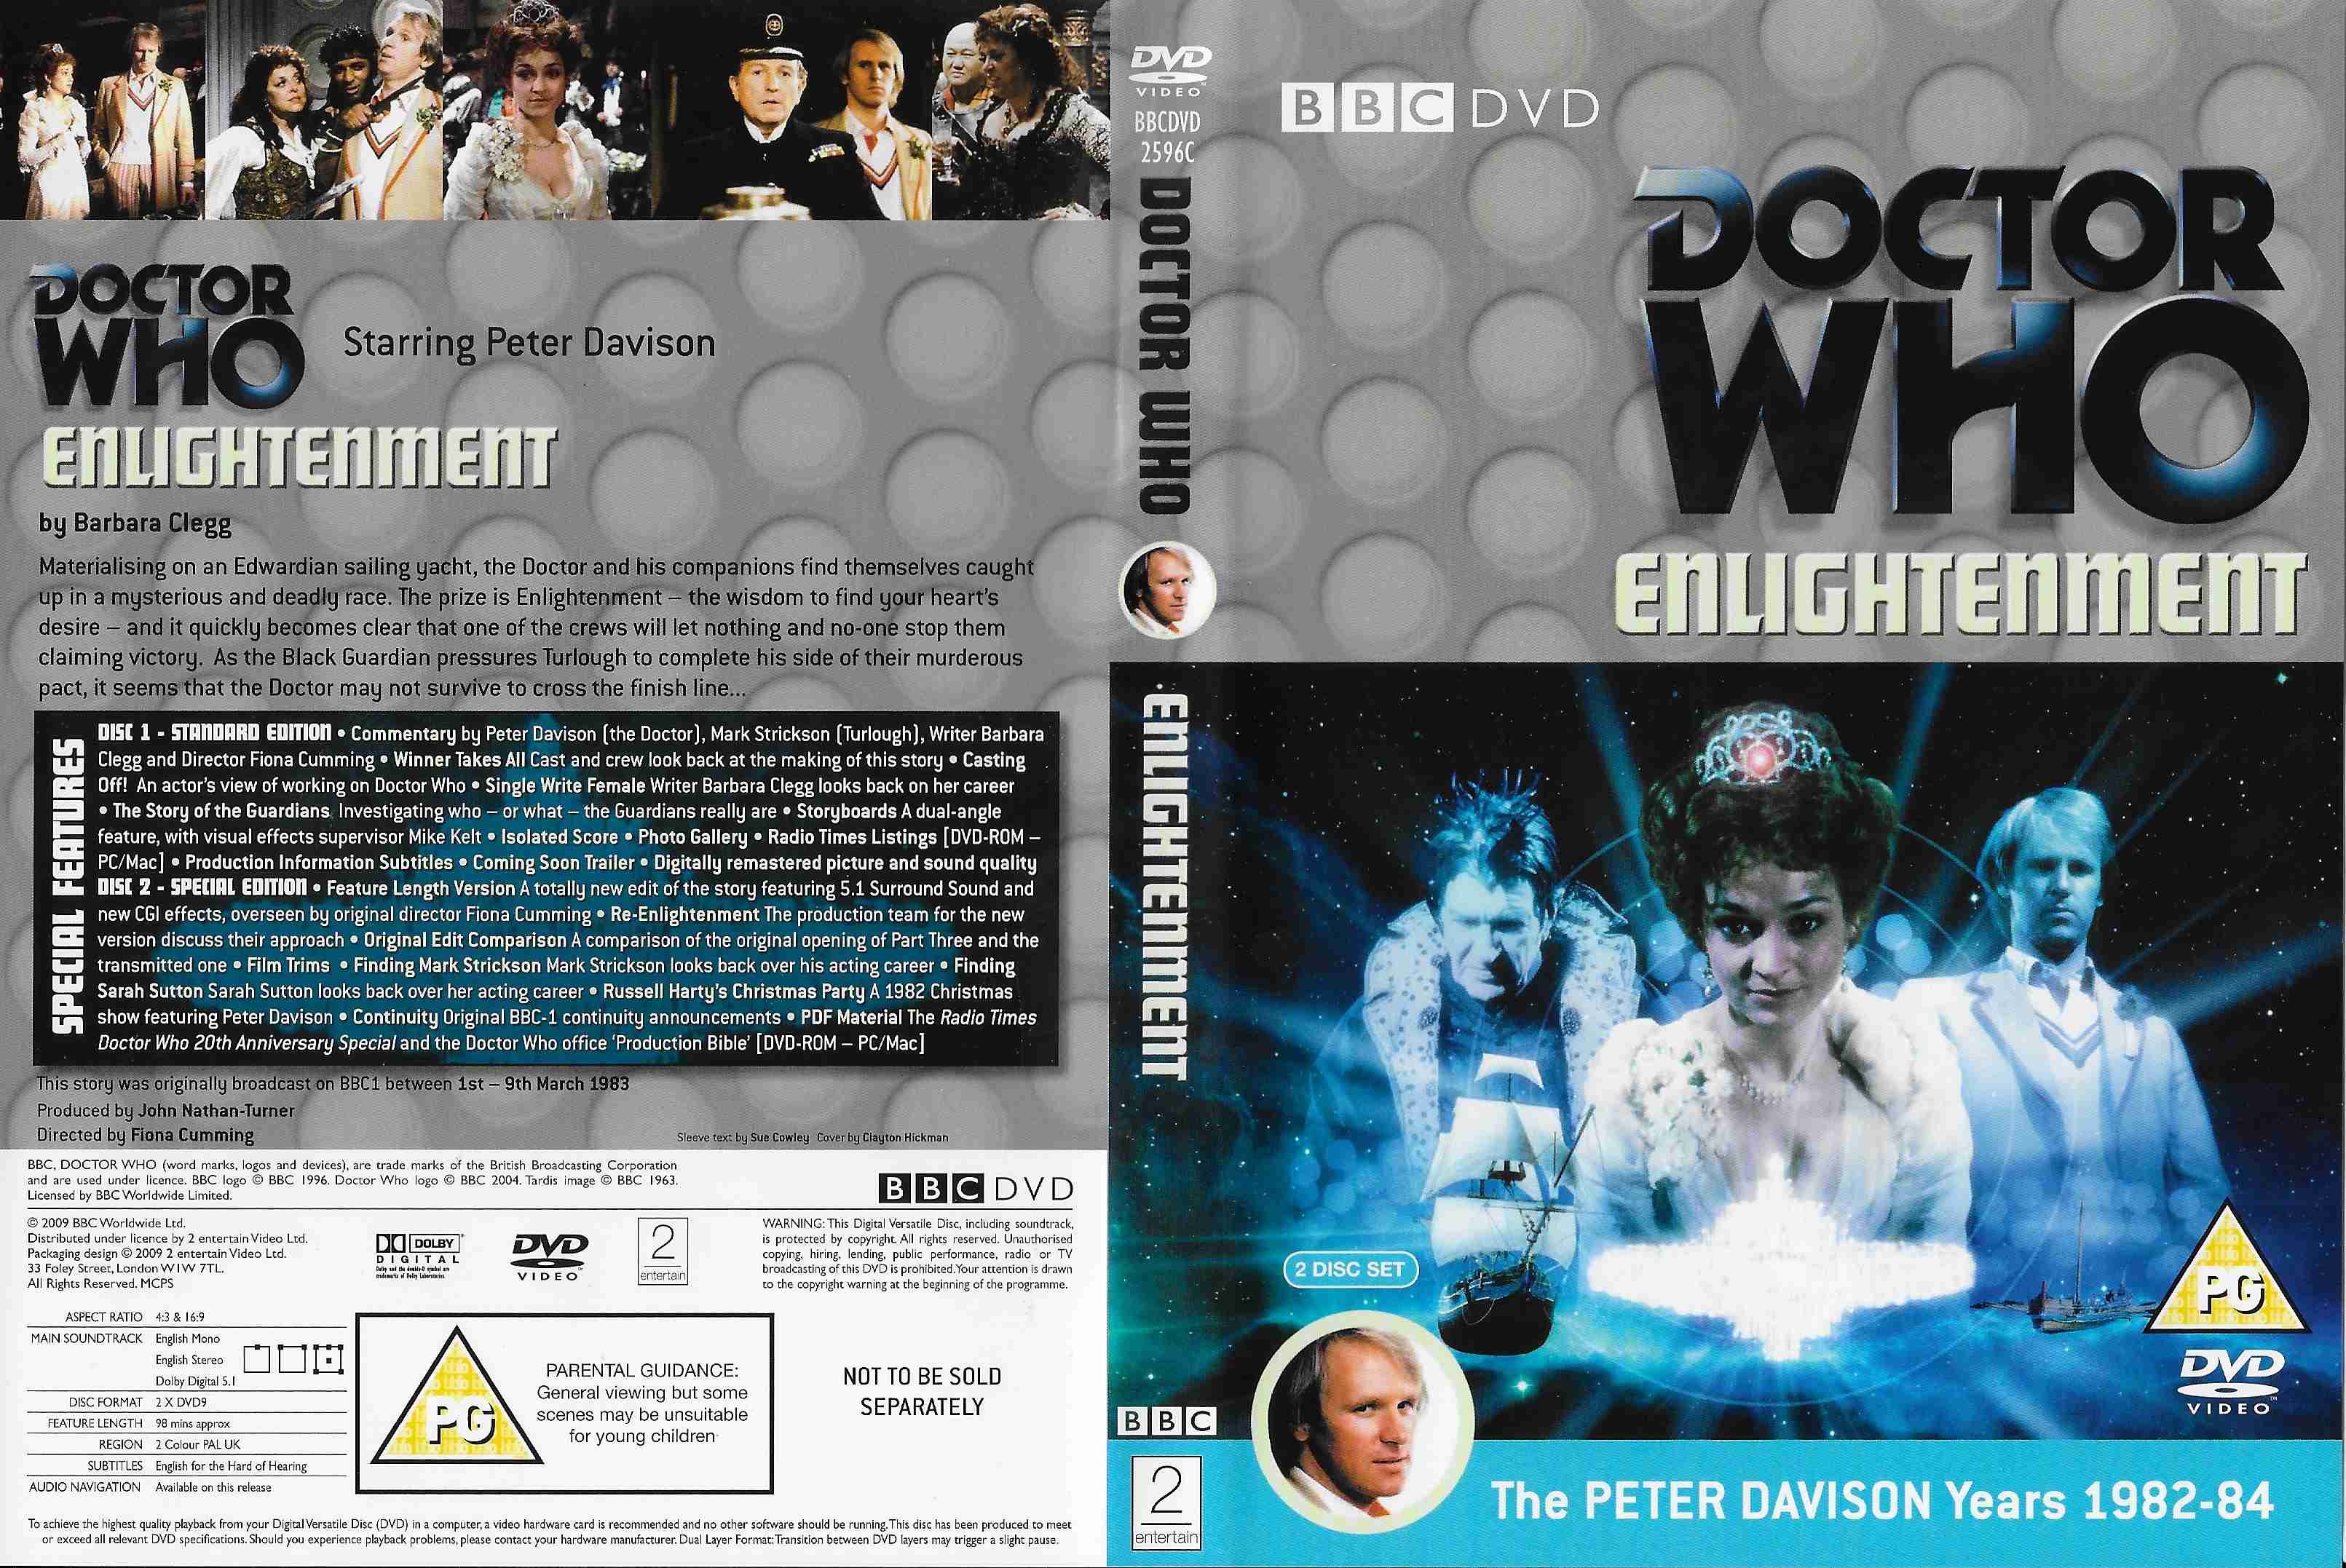 Picture of BBCDVD 2596C Doctor Who - Enlightenment by artist Barbara Clegg from the BBC records and Tapes library